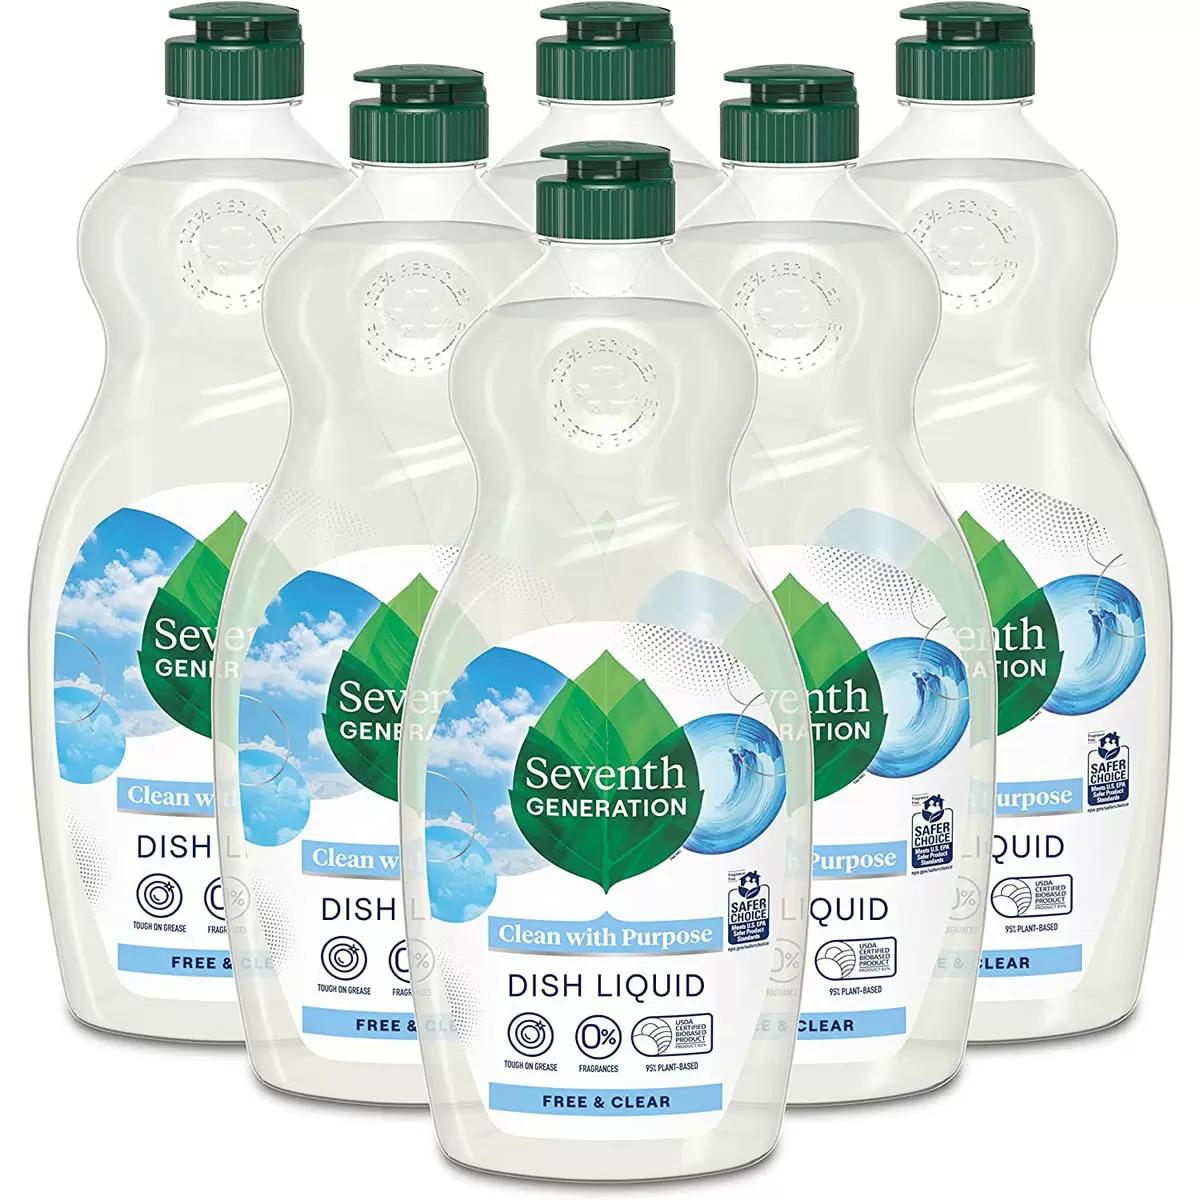 Seventh Generation Clear Dish Liquid Soap 6 Pack for $14.83 Shipped